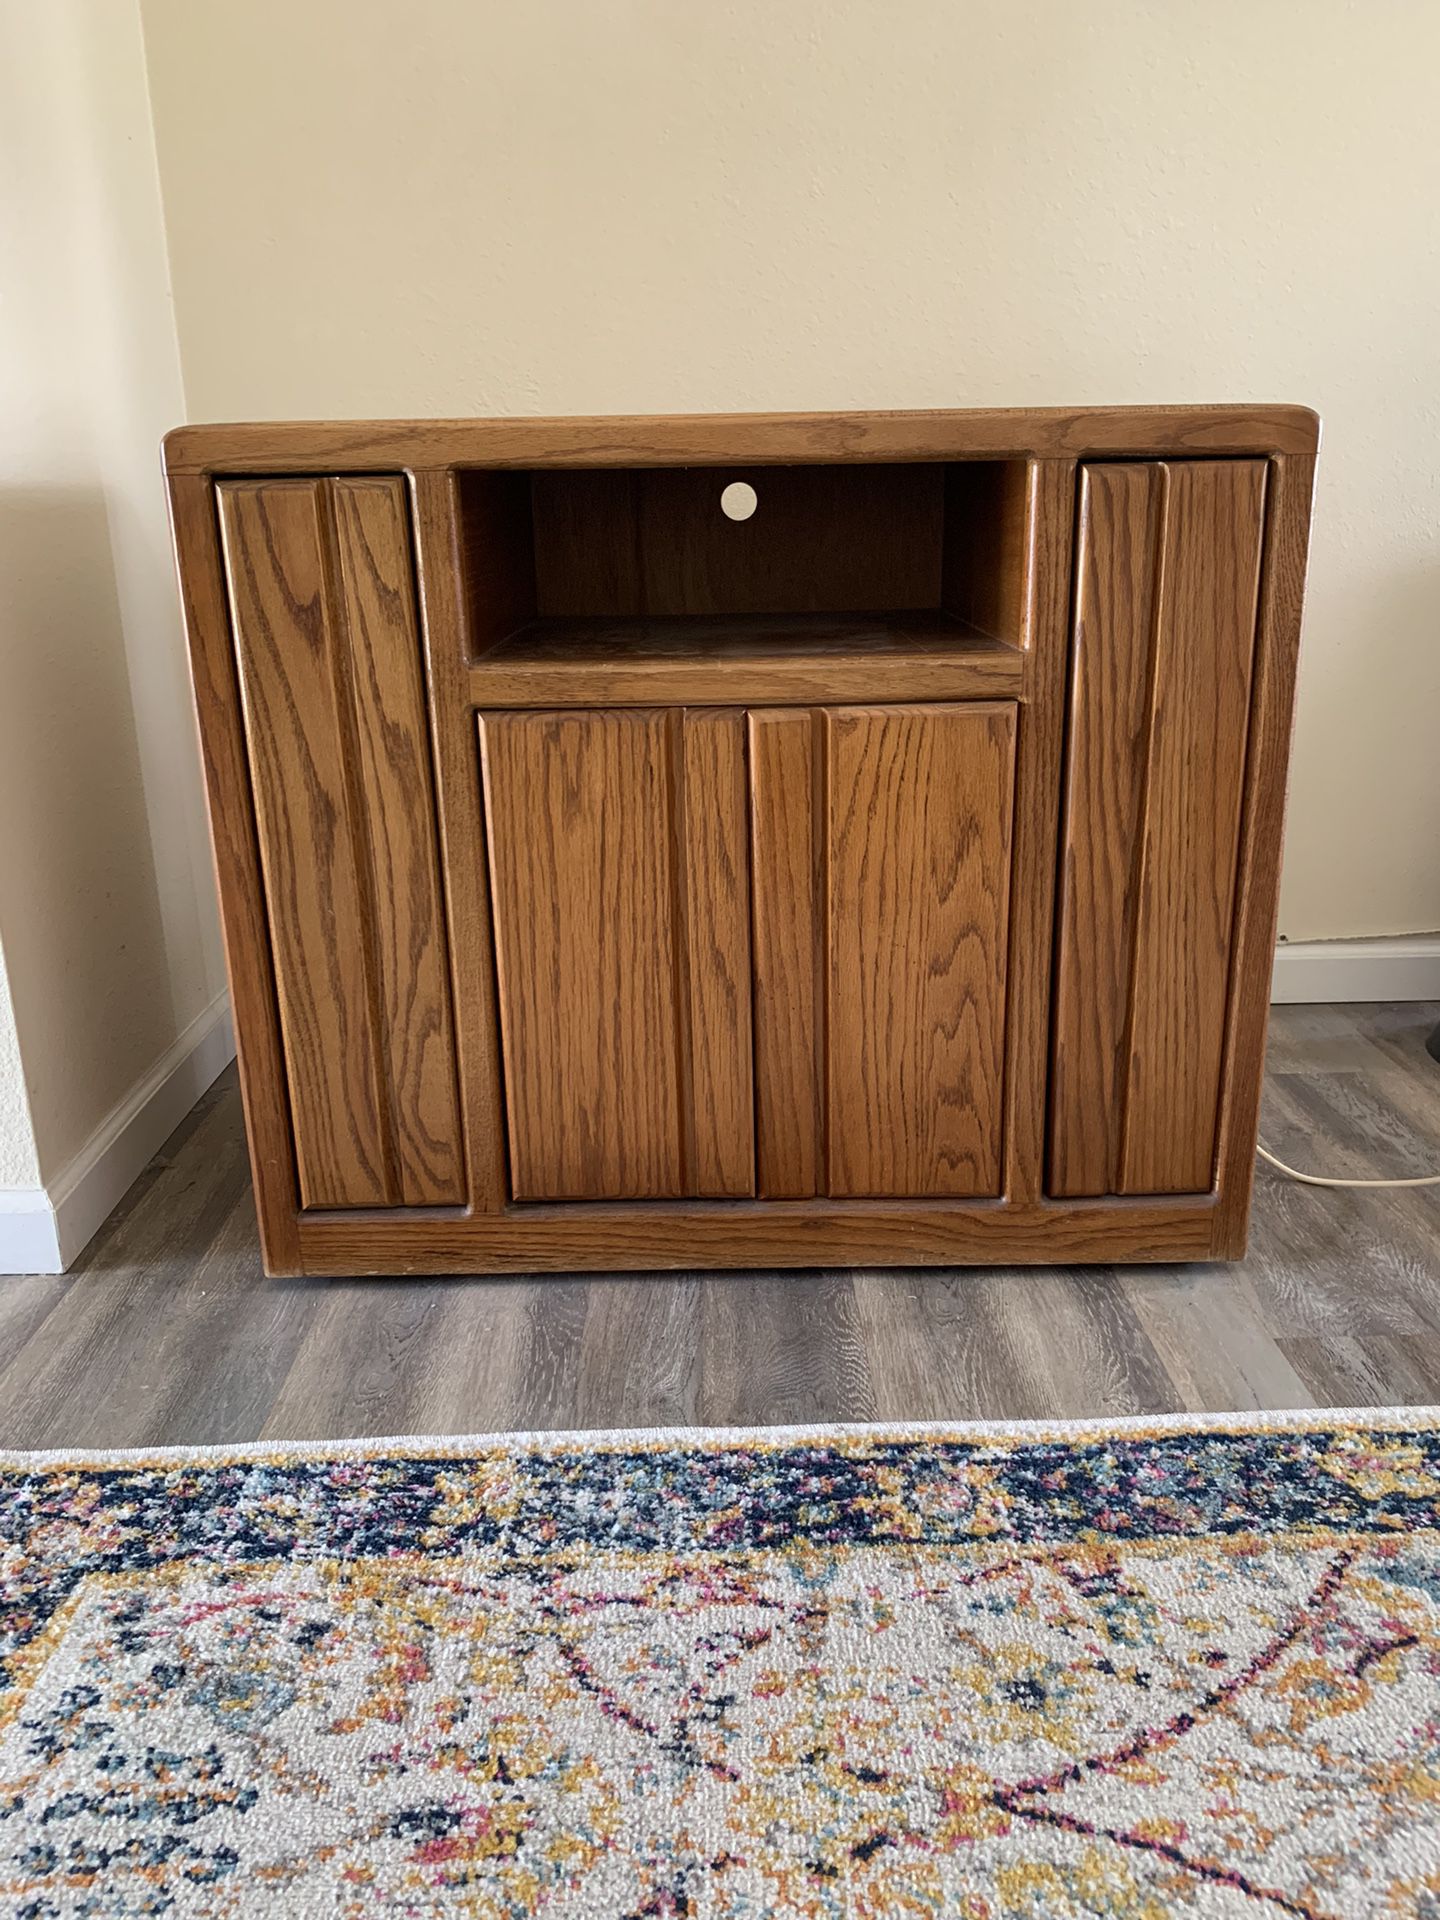 Oak TV-Media Cabinet with Pullout Shelves